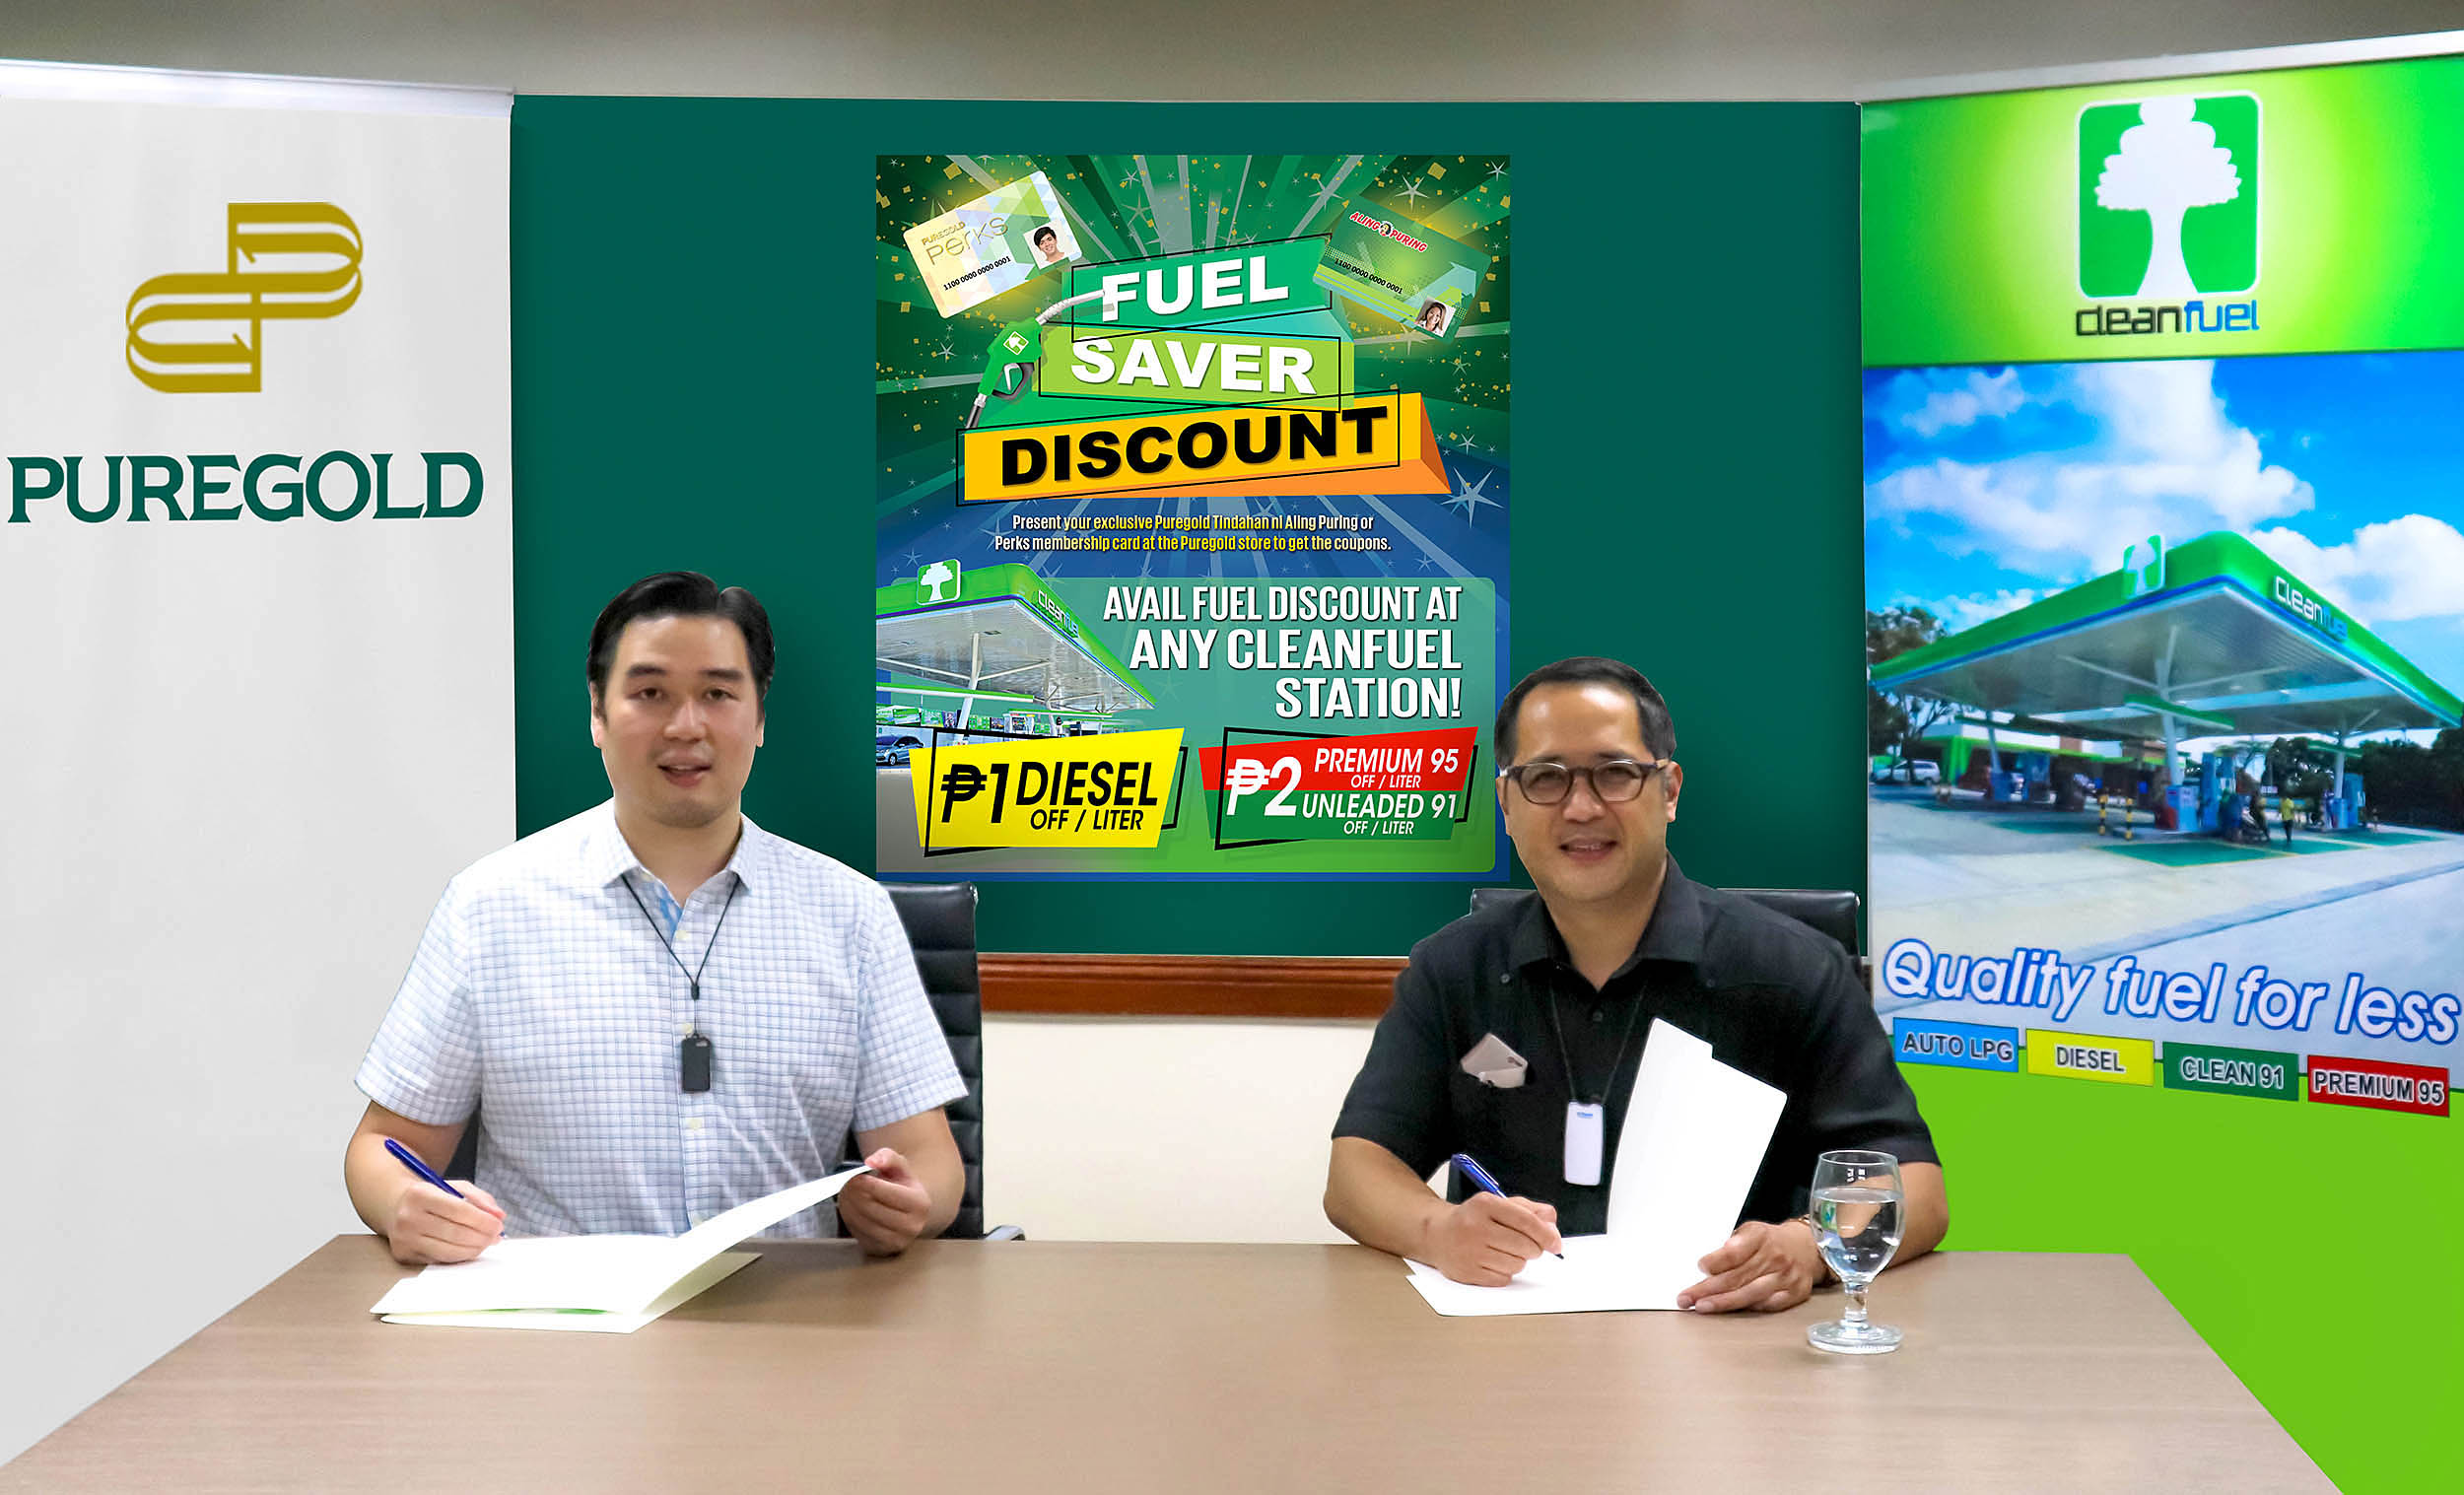 puregold-partners-with-cleanfuel-to-give-fuel-discounts-to-members